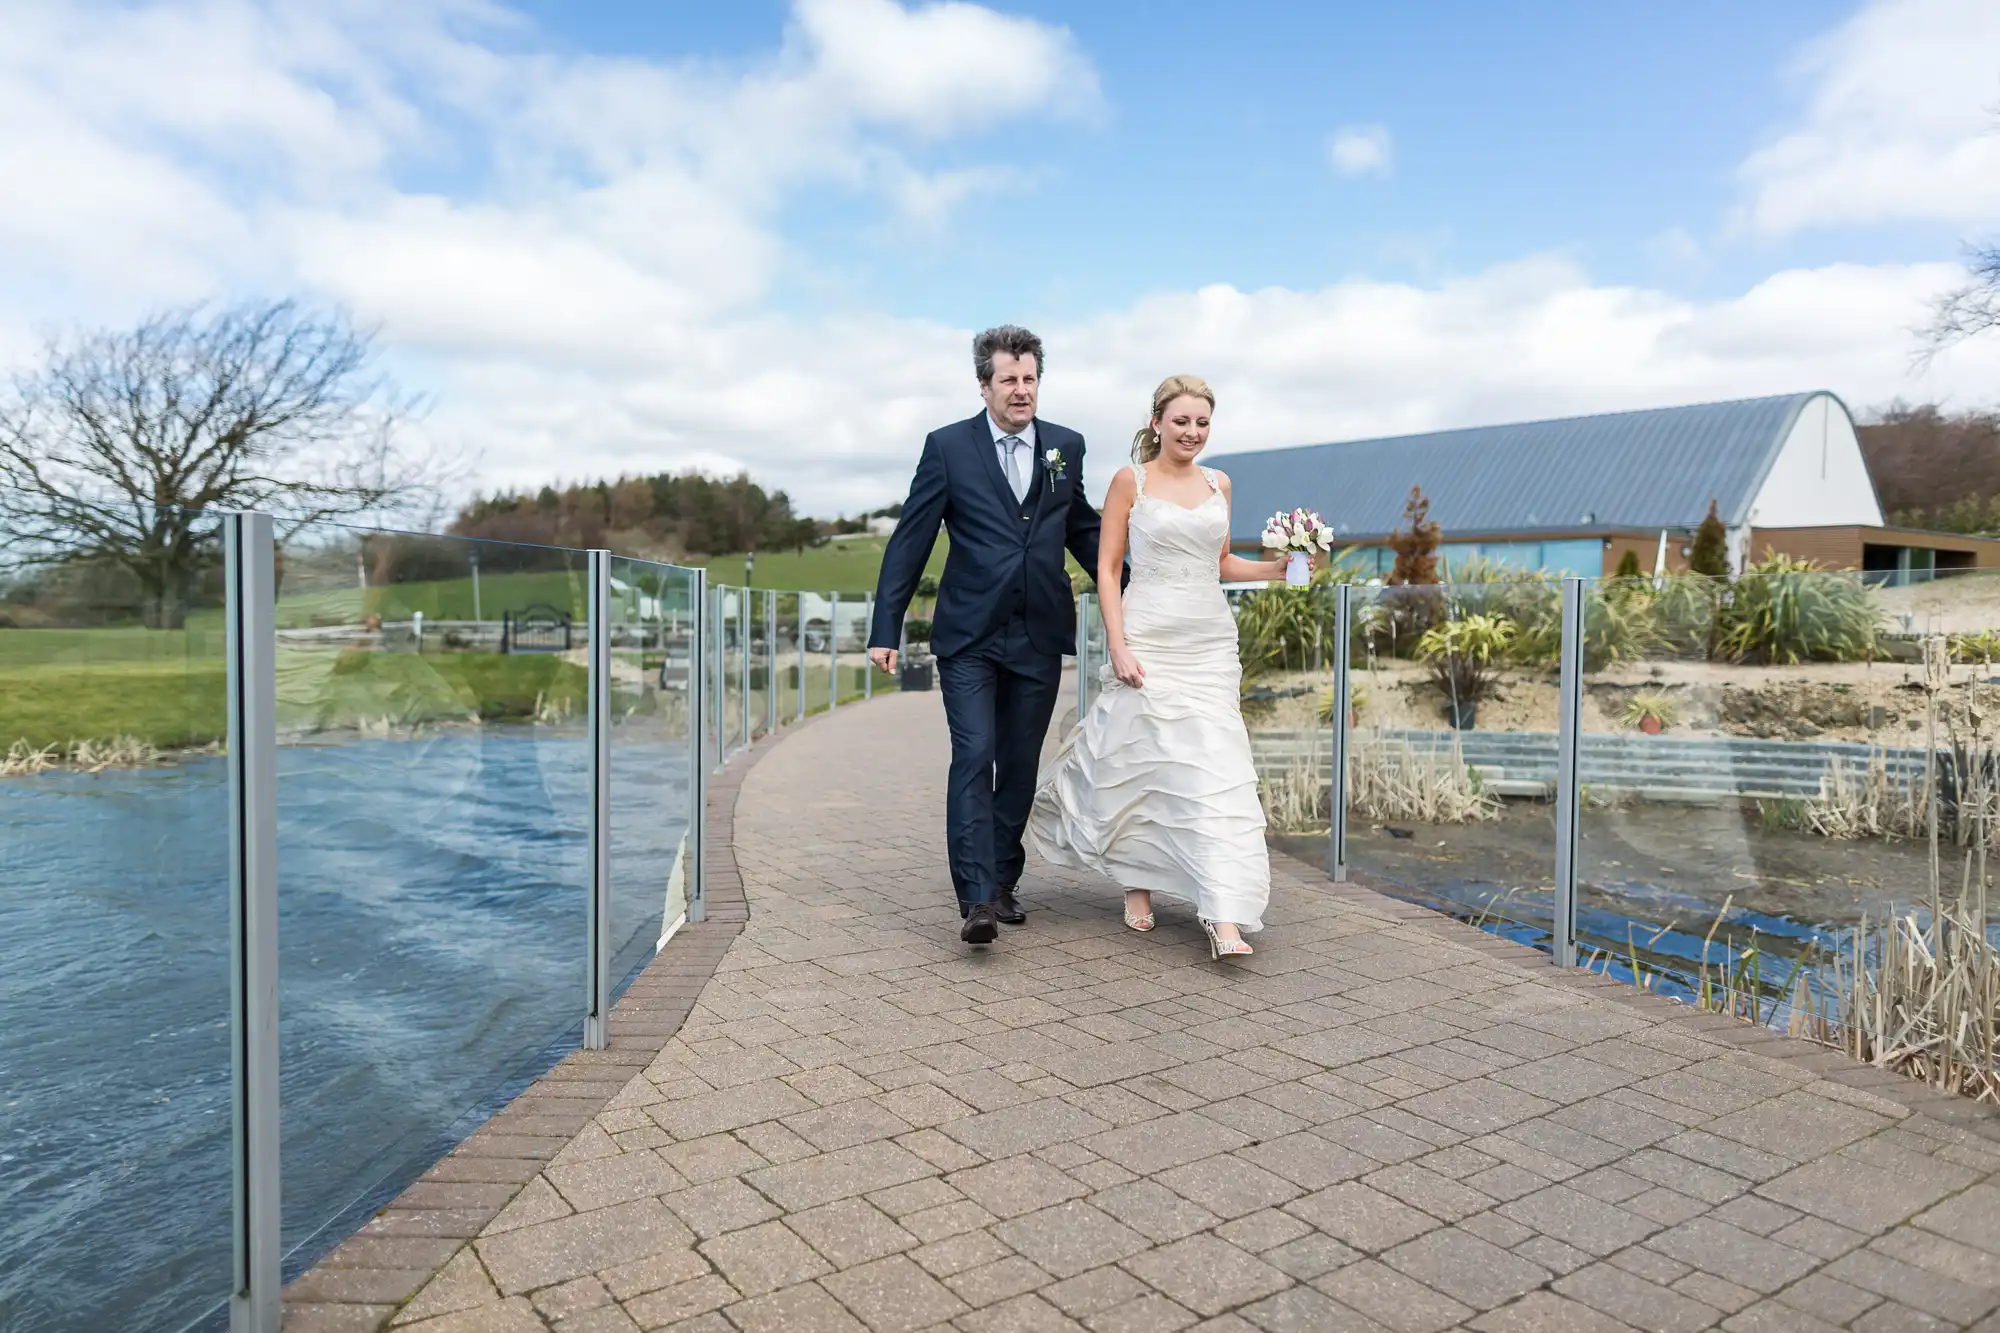 A bride and groom walking along a glass barrier-enclosed pathway with a pond and rural buildings in the background.